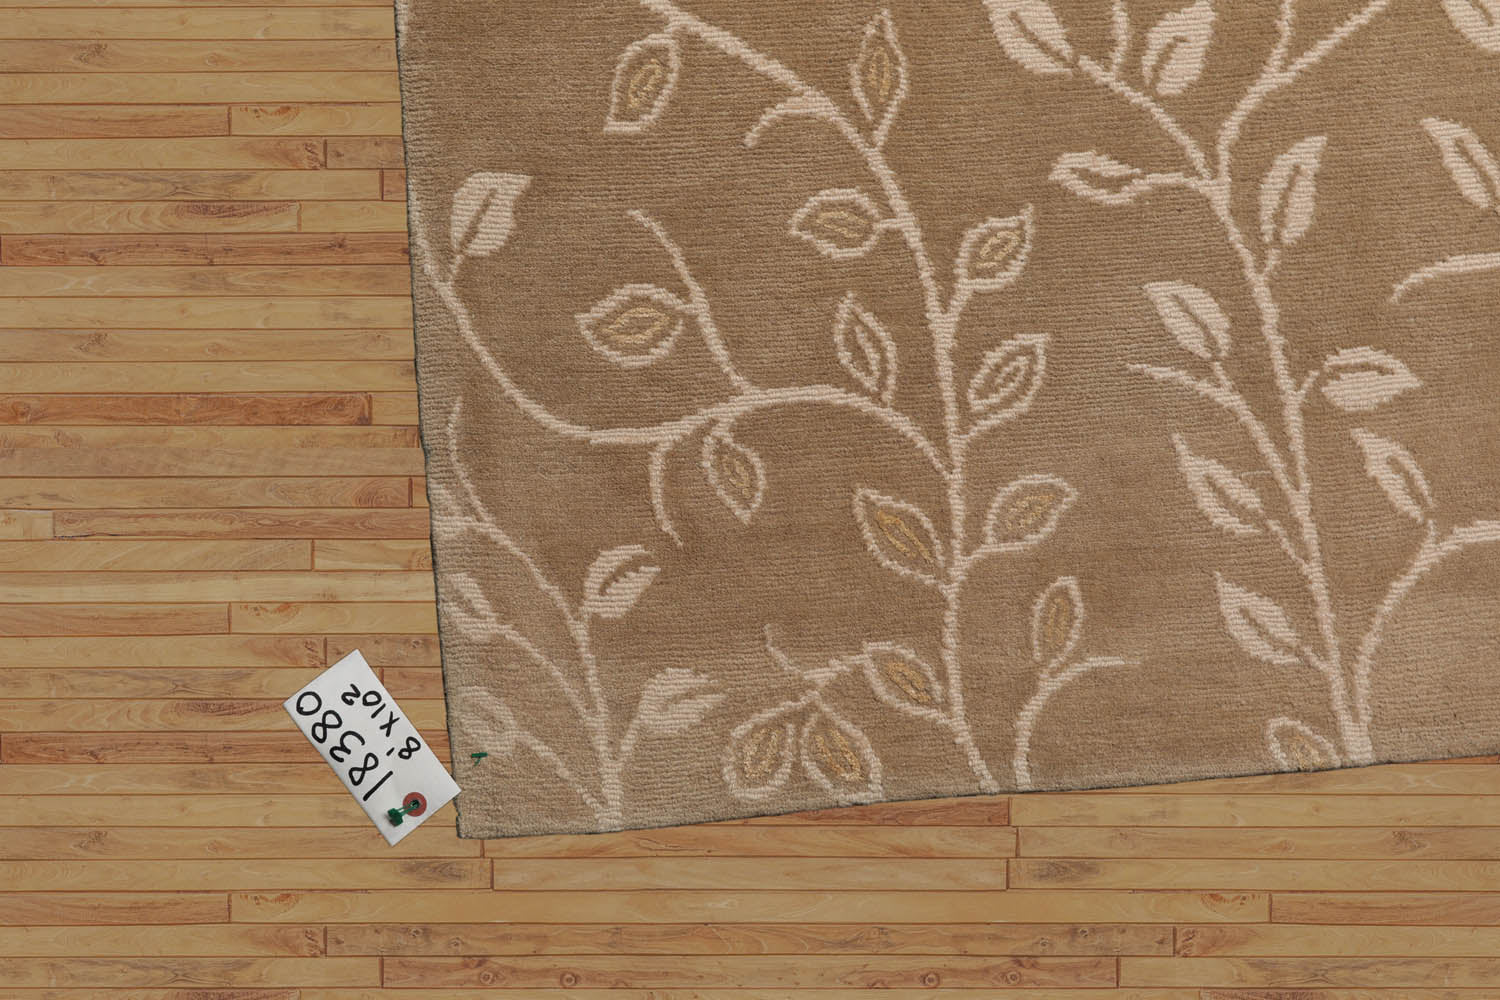 Corey-Ray 8x10 Tone On Tone Beige Hand Knotted Tibetan 100% Wool Lapchi Transitional Oriental Area Rug